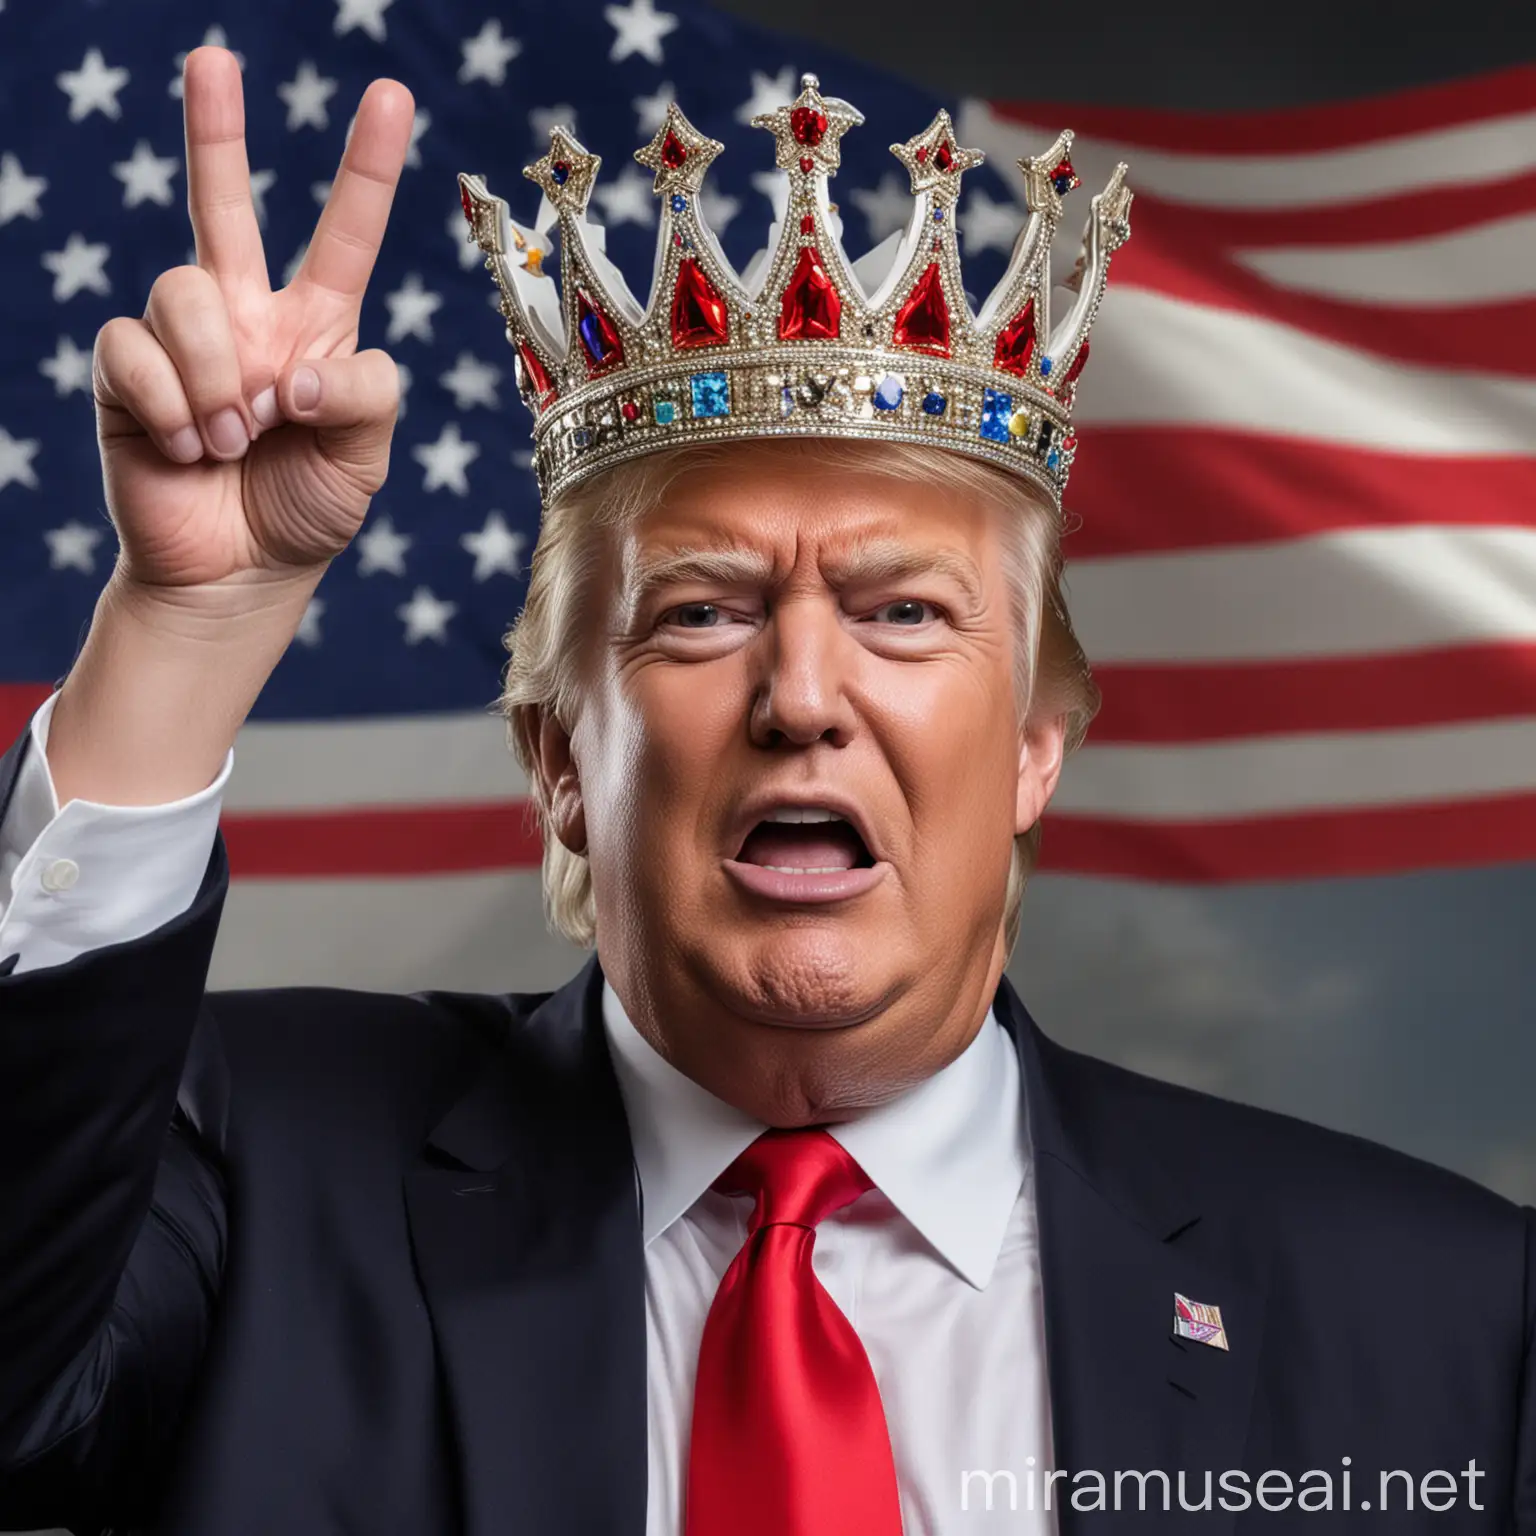 Extra patriotic image of Donald Trump with his hand up showing he won 2wice and add a crown on his head